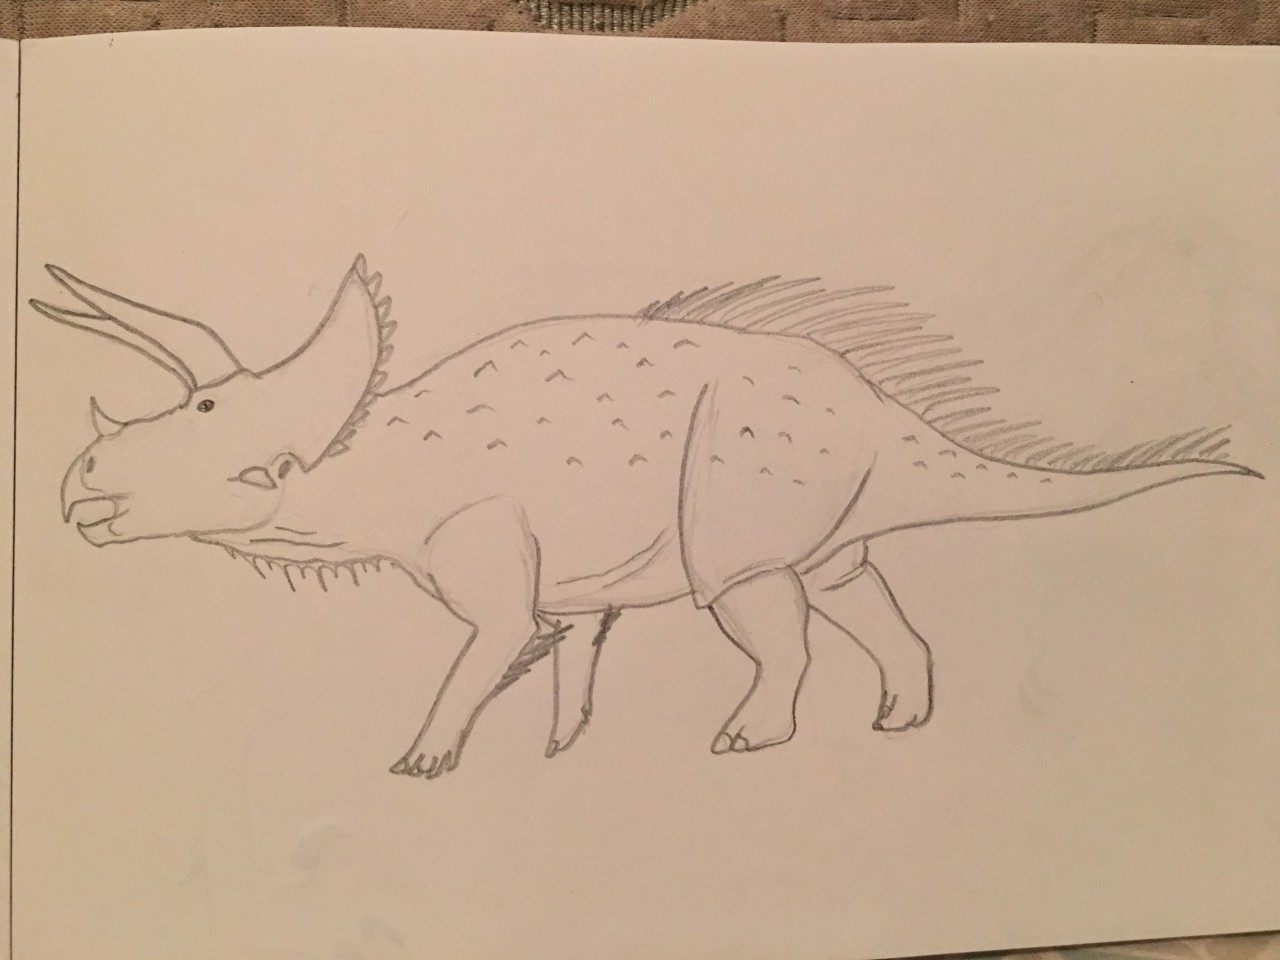 Learn how to draw a Triceratops - EASY TO DRAW EVERYTHING